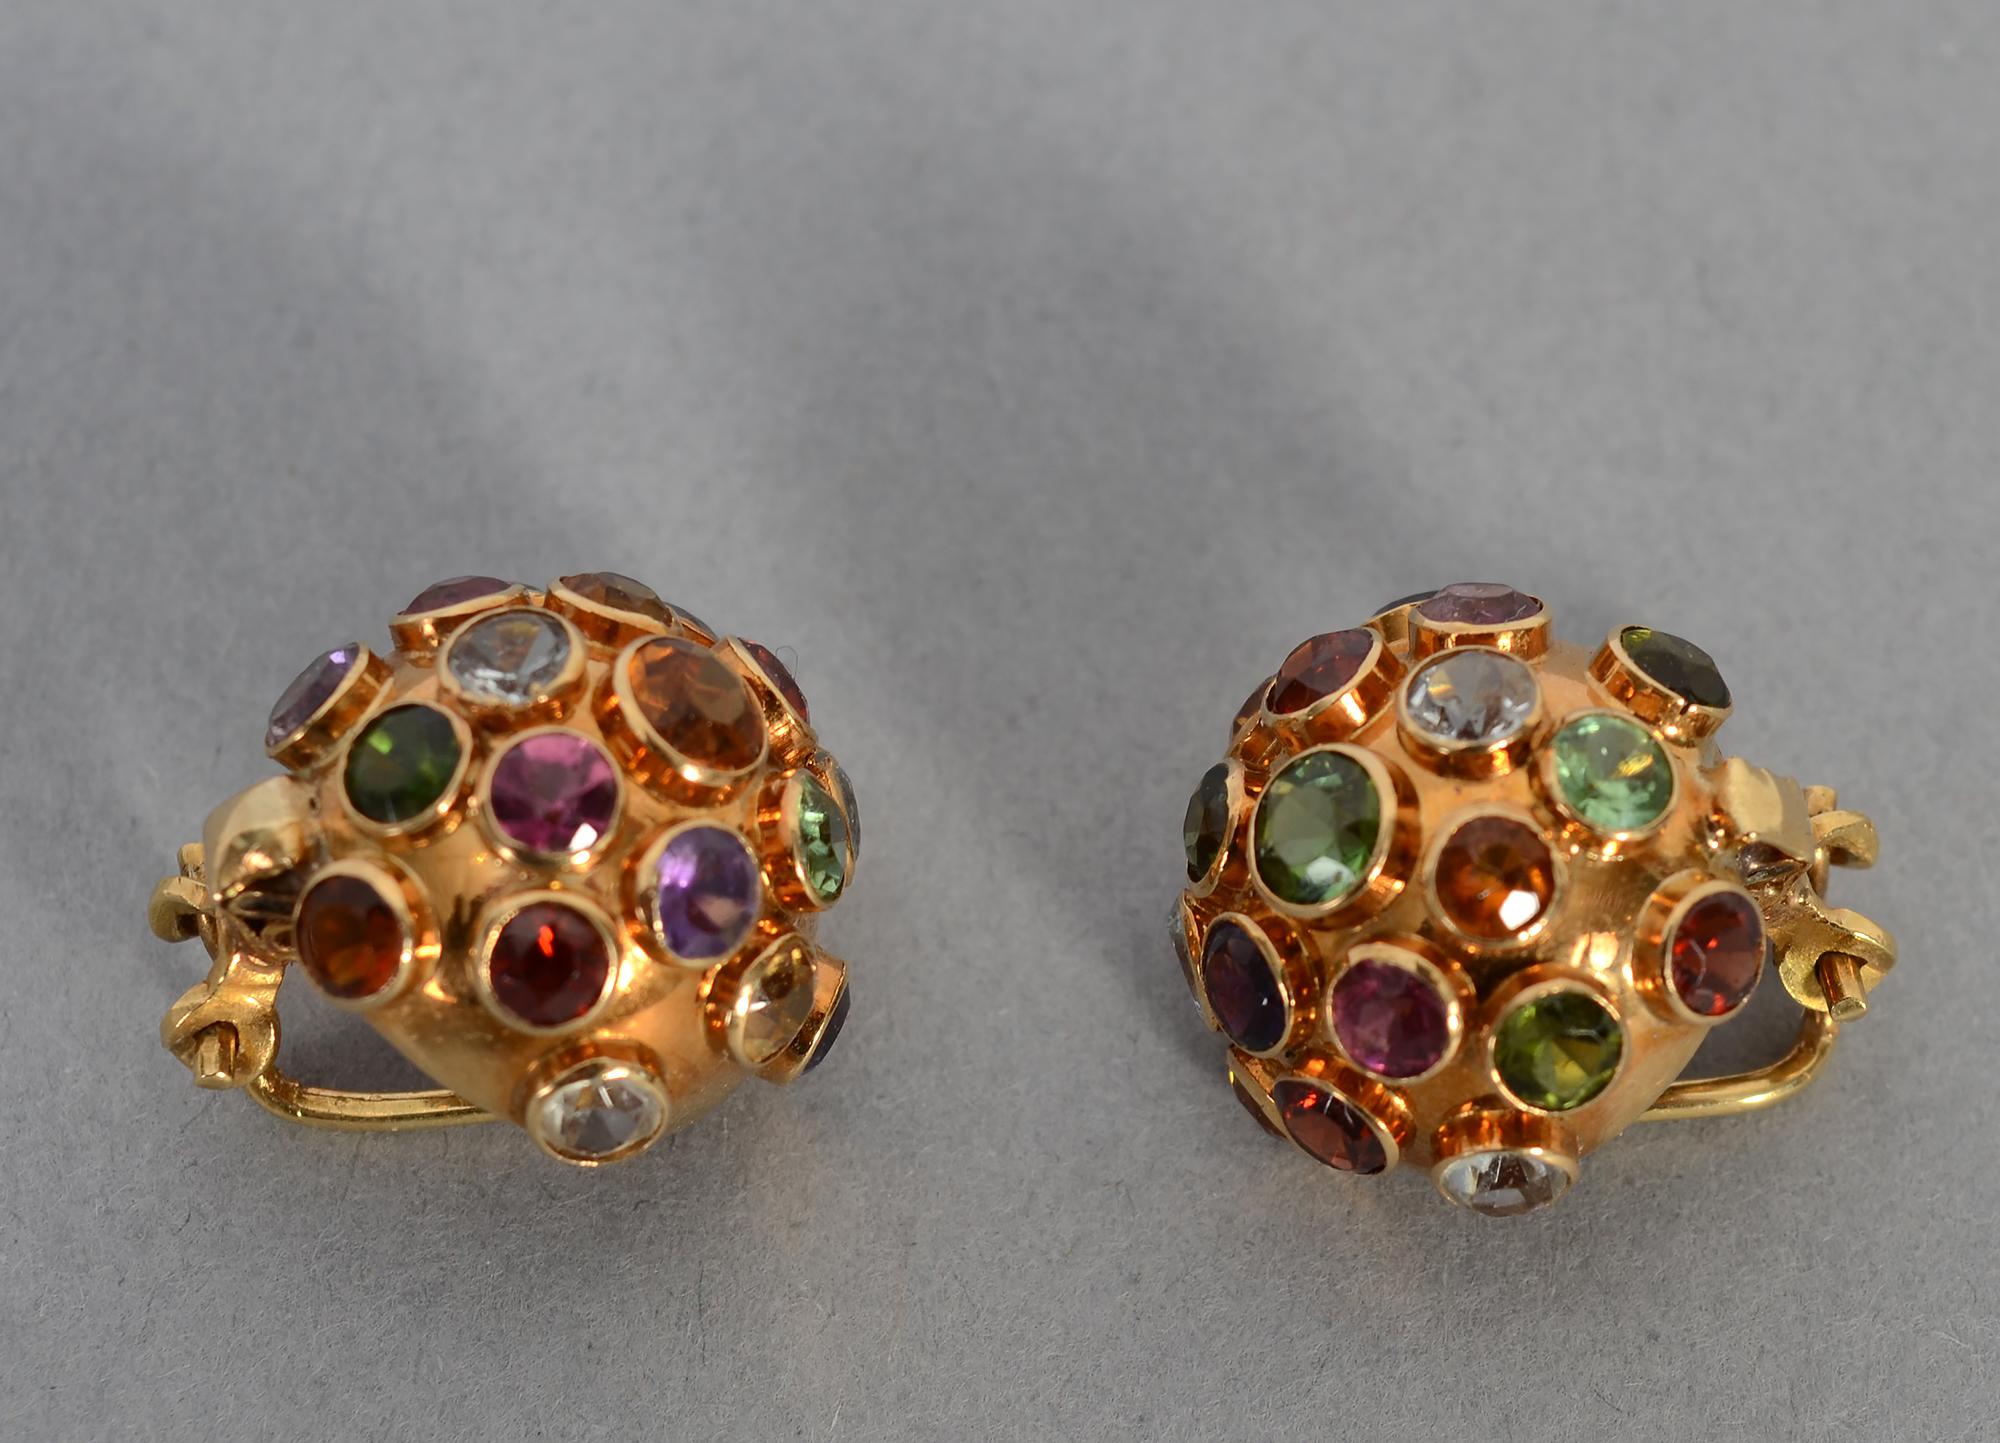 The domed, multigem Sputnik design is emblematic of the 1950's. These earrings are studded with faceted stones that include amethyst; peridot; citrine;  blue topaz and various shades of tourmaline. The stones are of varying sizes.
Clip backs can be